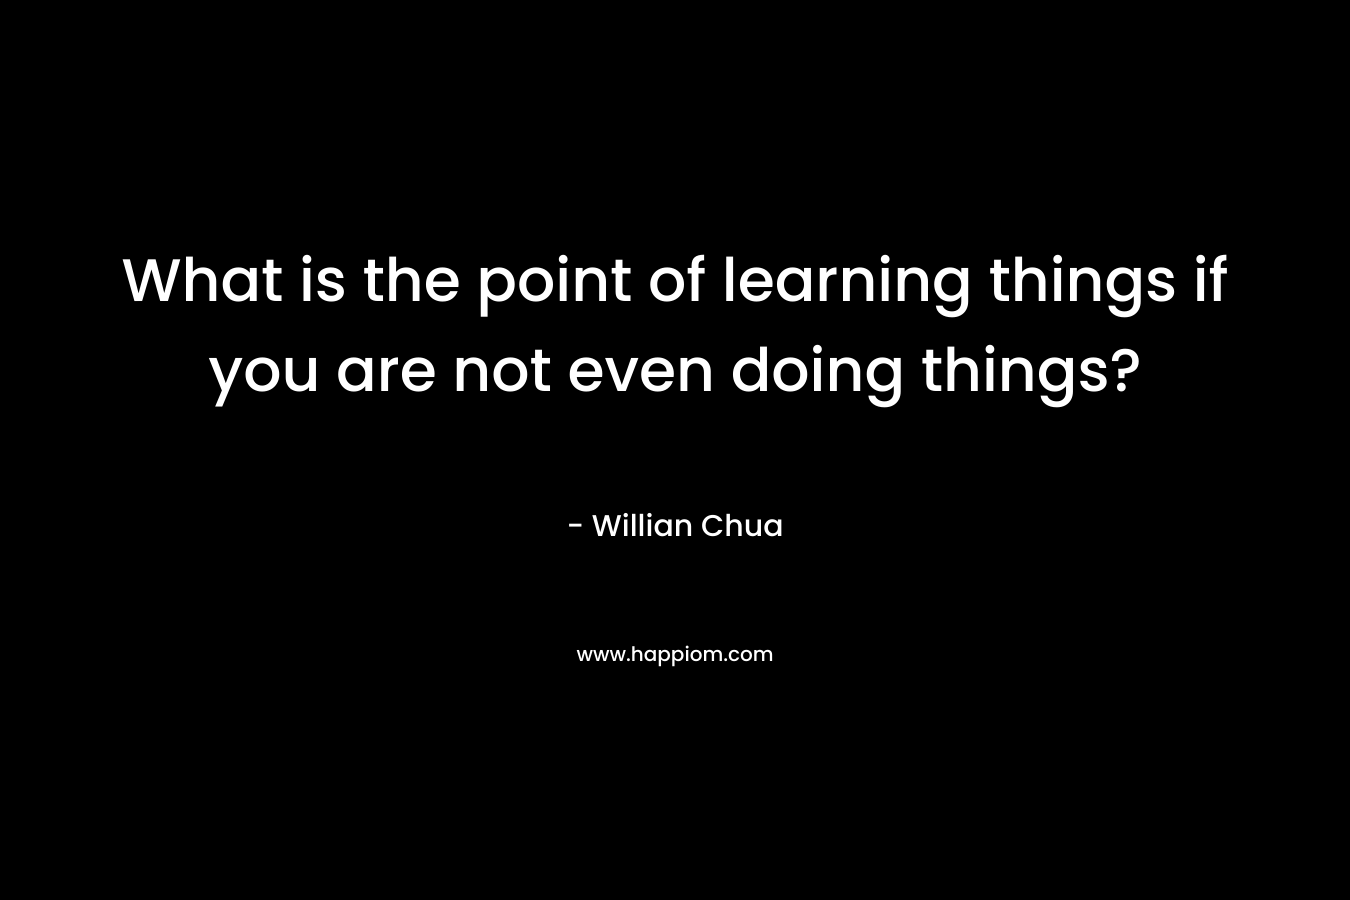 What is the point of learning things if you are not even doing things? – Willian Chua